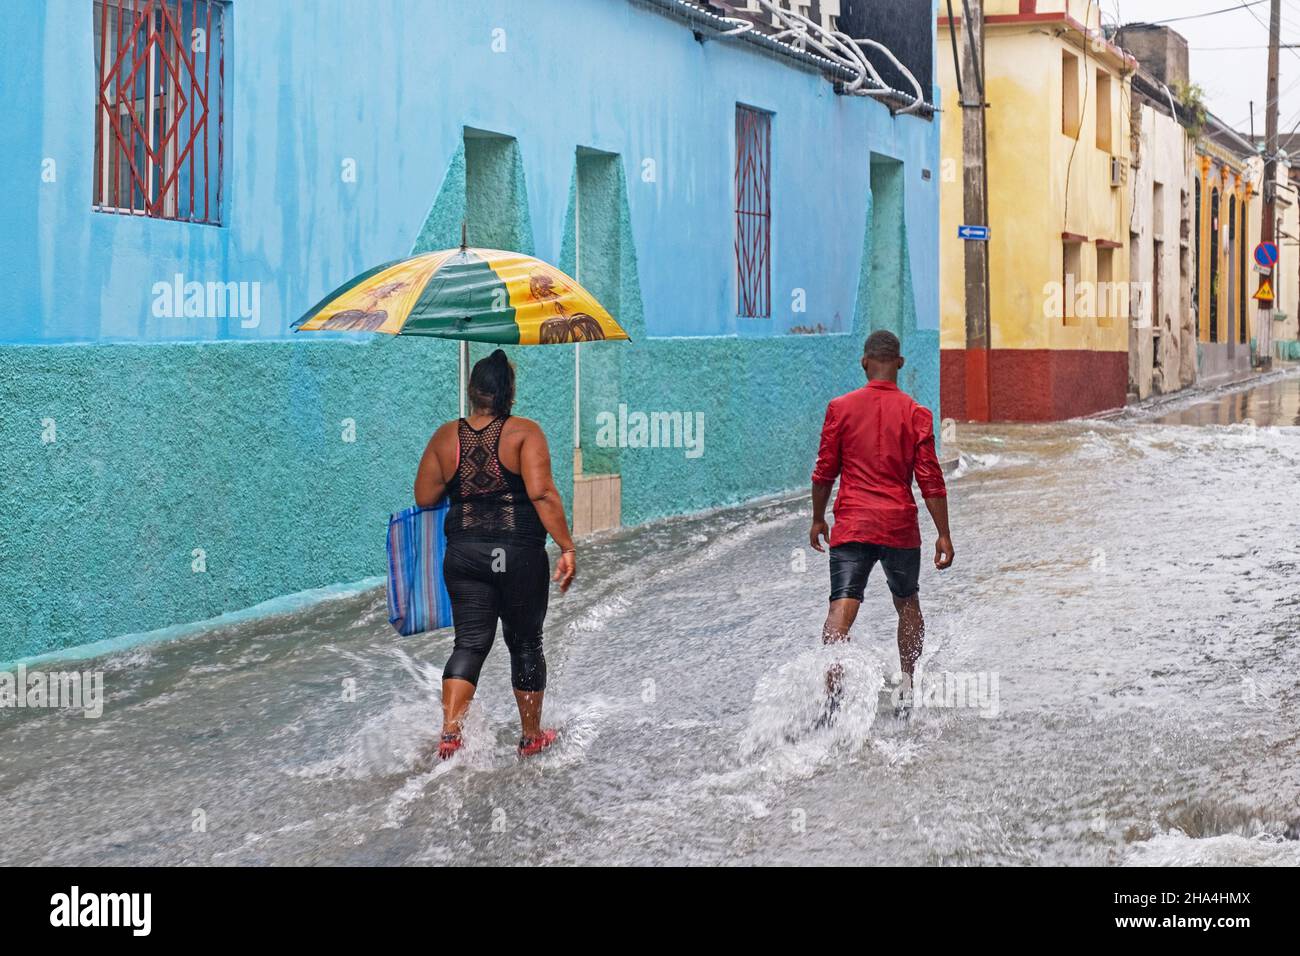 Cubans with umbrellas walking in flooded street during torrential rain in the city Santiago de Cuba on the island Cuba, Caribbean Stock Photo